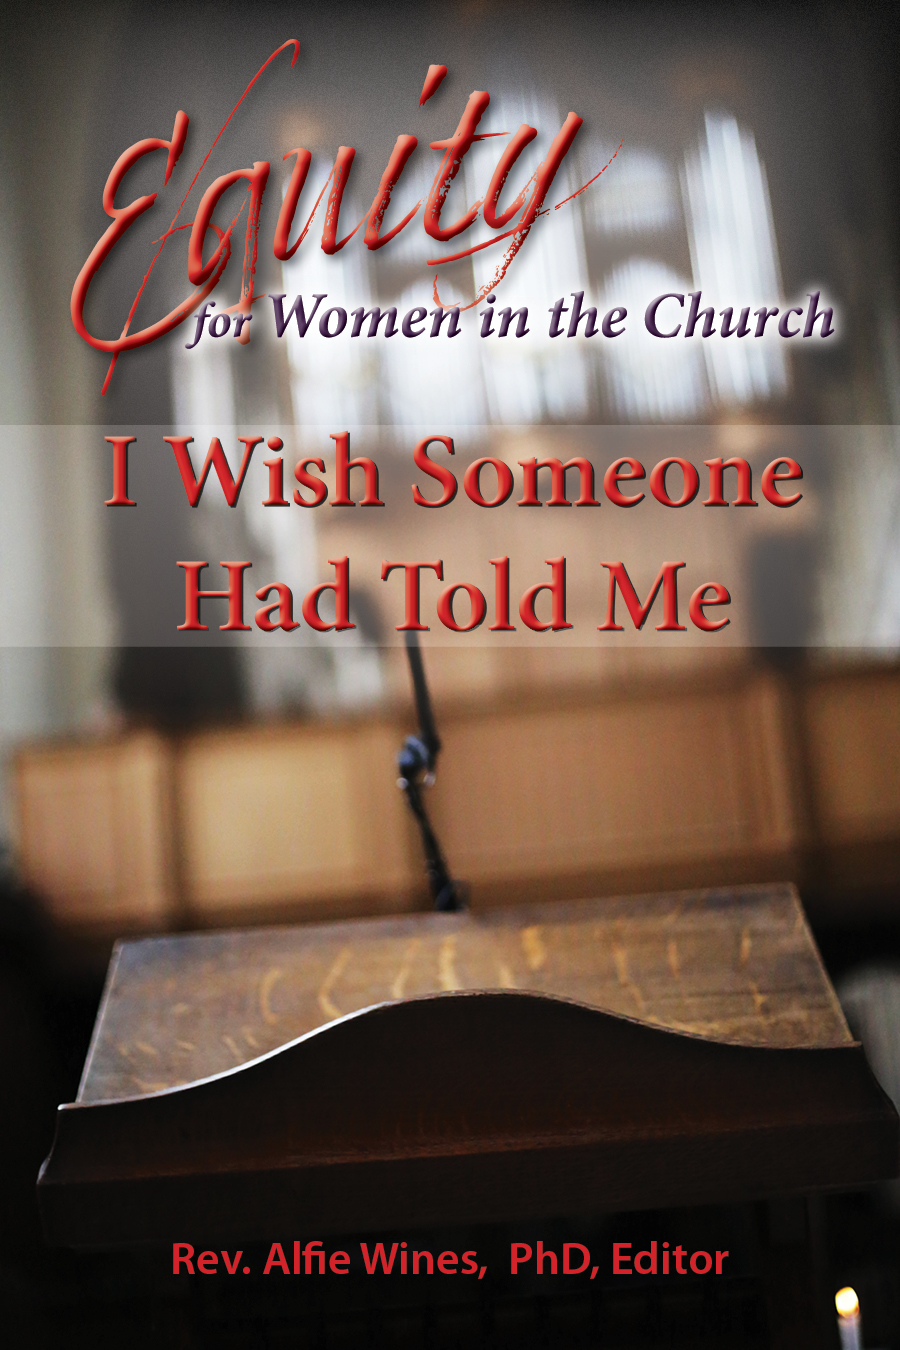 I Wish Someone Had told Me: Equity for Women in the Church, Edited by Rev. Dr. Alfie Wines